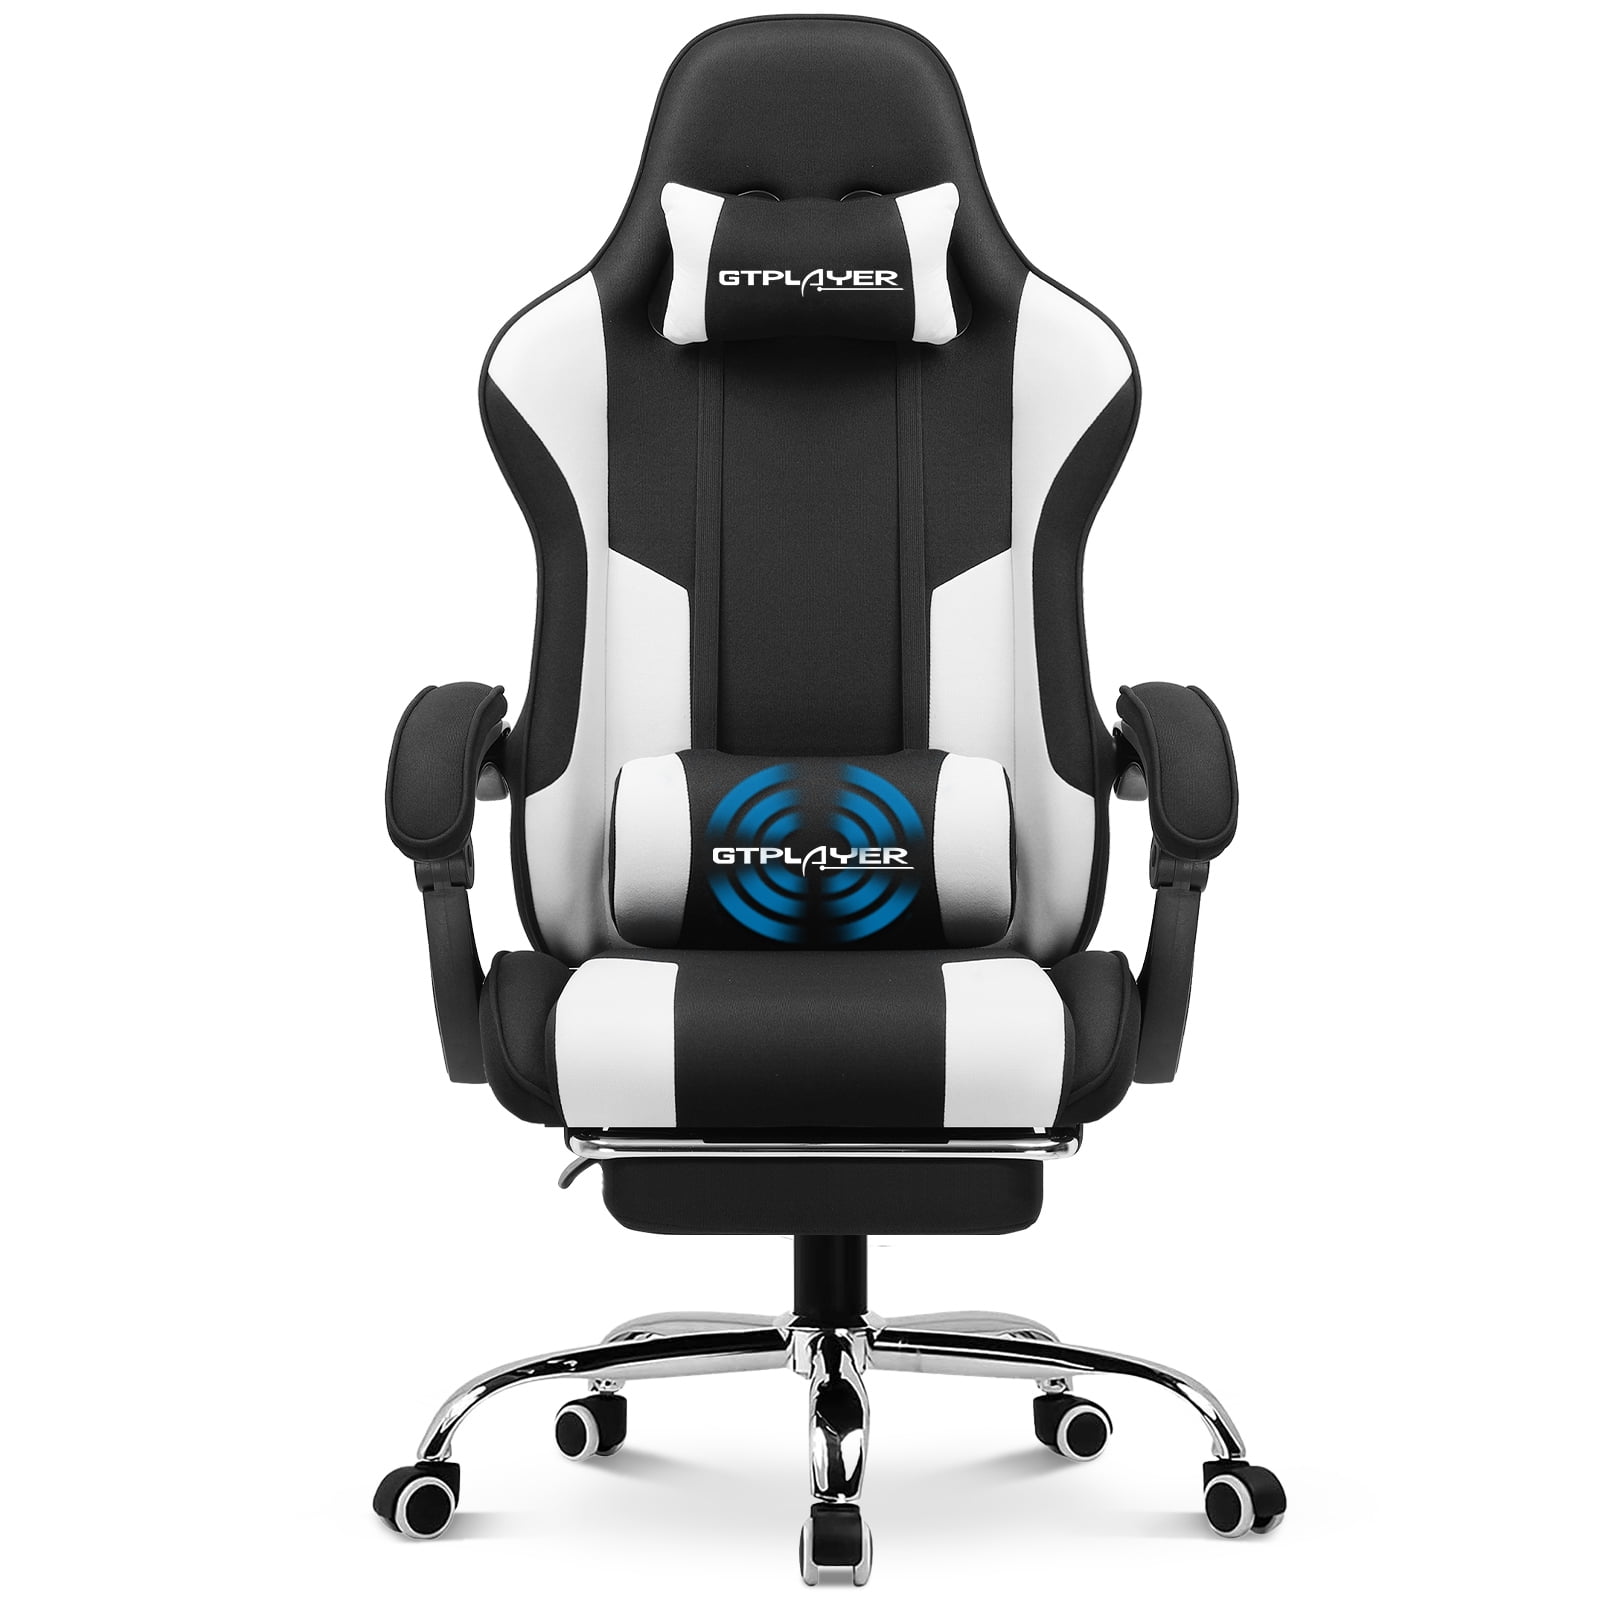 Gtplayer Gaming Chair with Footrest and Ergonomic Lumbar Massage Pillow, White